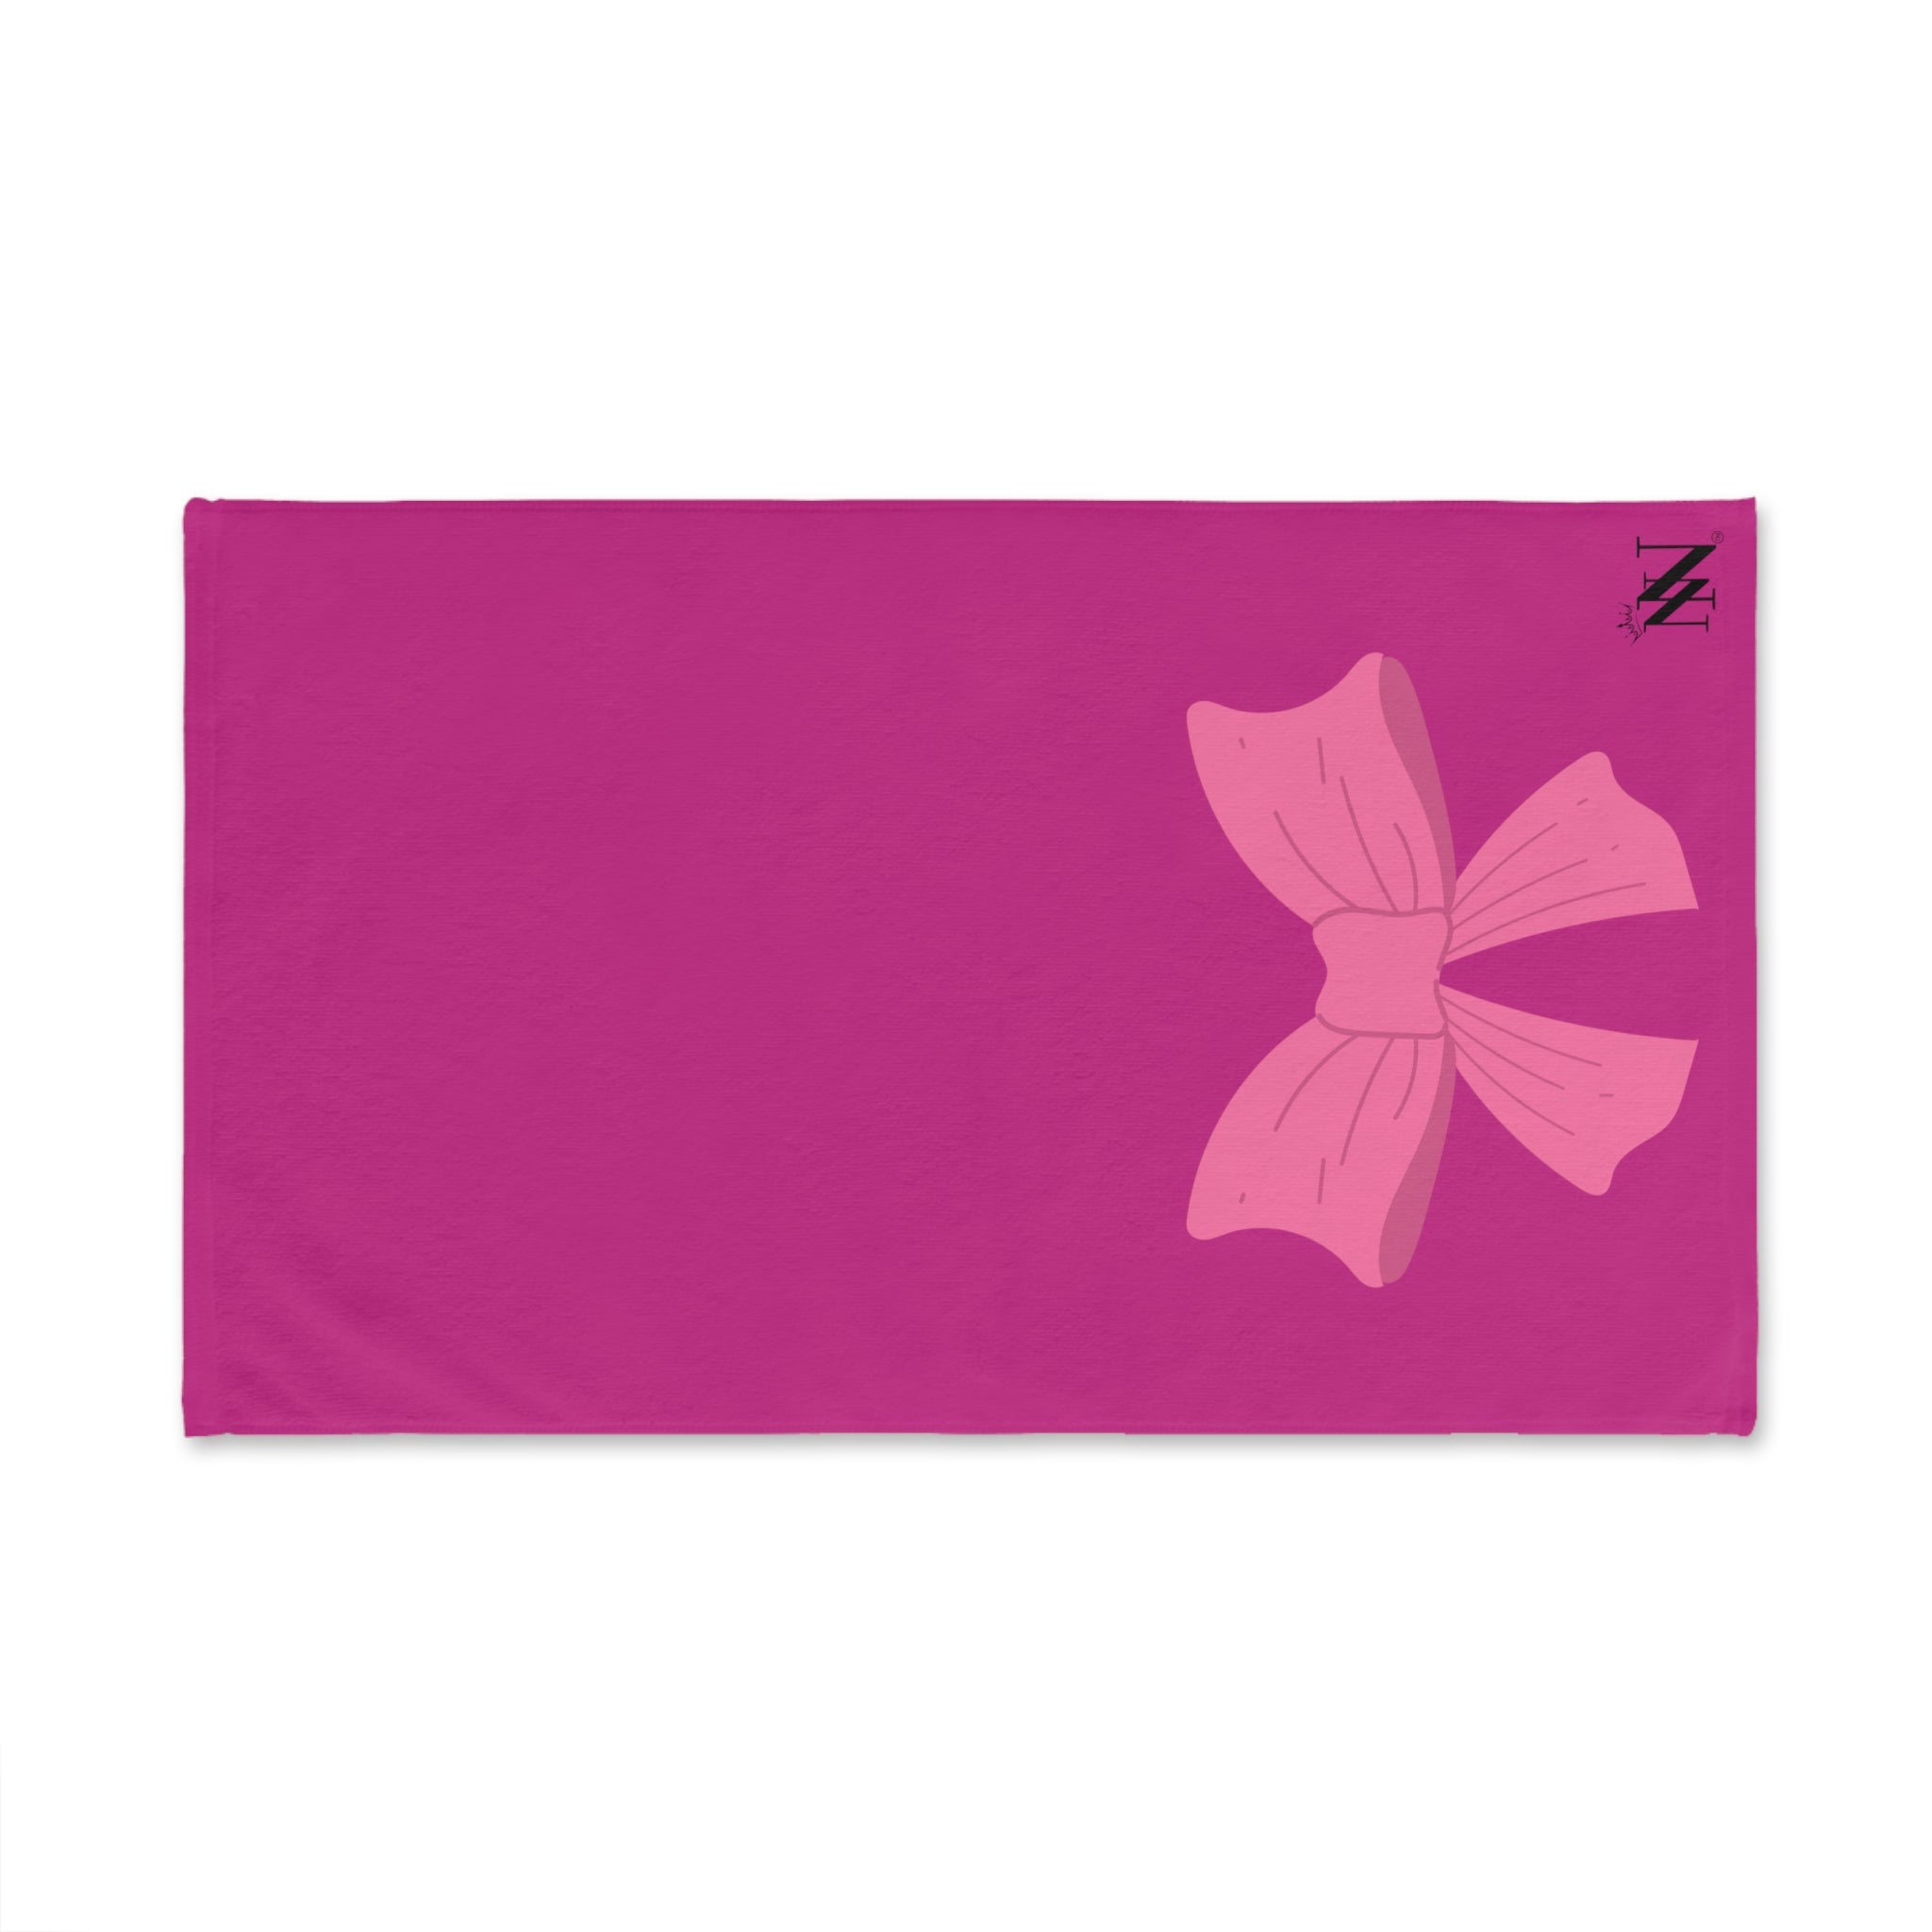 Bow Ribbon Pink Fuscia | Funny Gifts for Men - Gifts for Him - Birthday Gifts for Men, Him, Husband, Boyfriend, New Couple Gifts, Fathers & Valentines Day Gifts, Hand Towels NECTAR NAPKINS